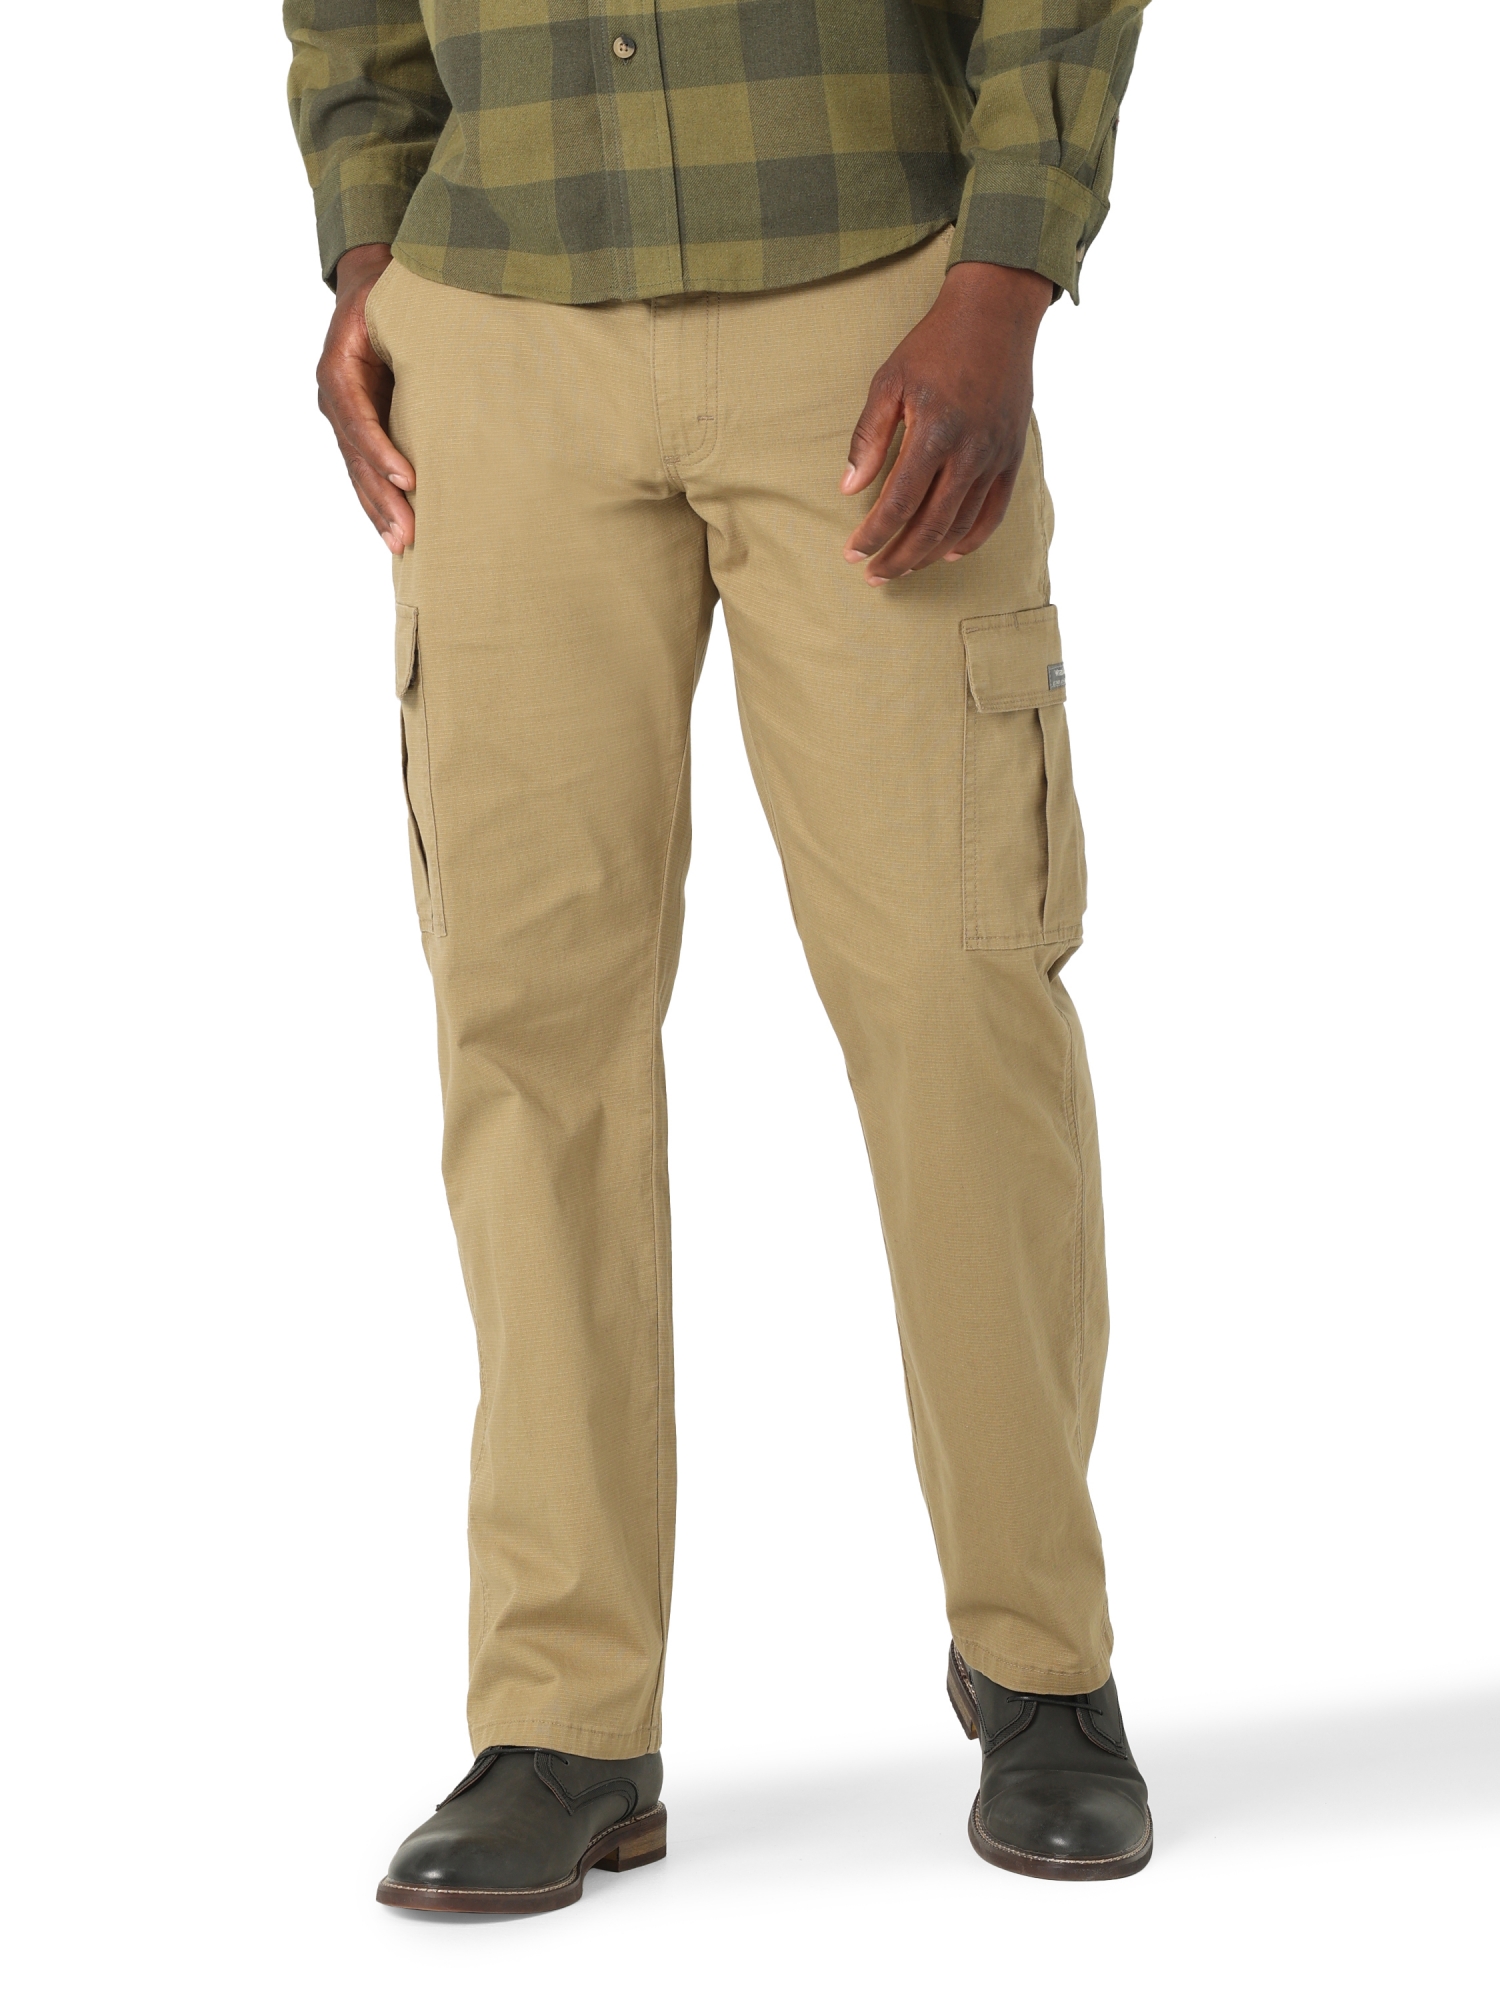 Wrangler Men's and Big Men's Relaxed Fit Legacy Cargo Pant - image 1 of 9